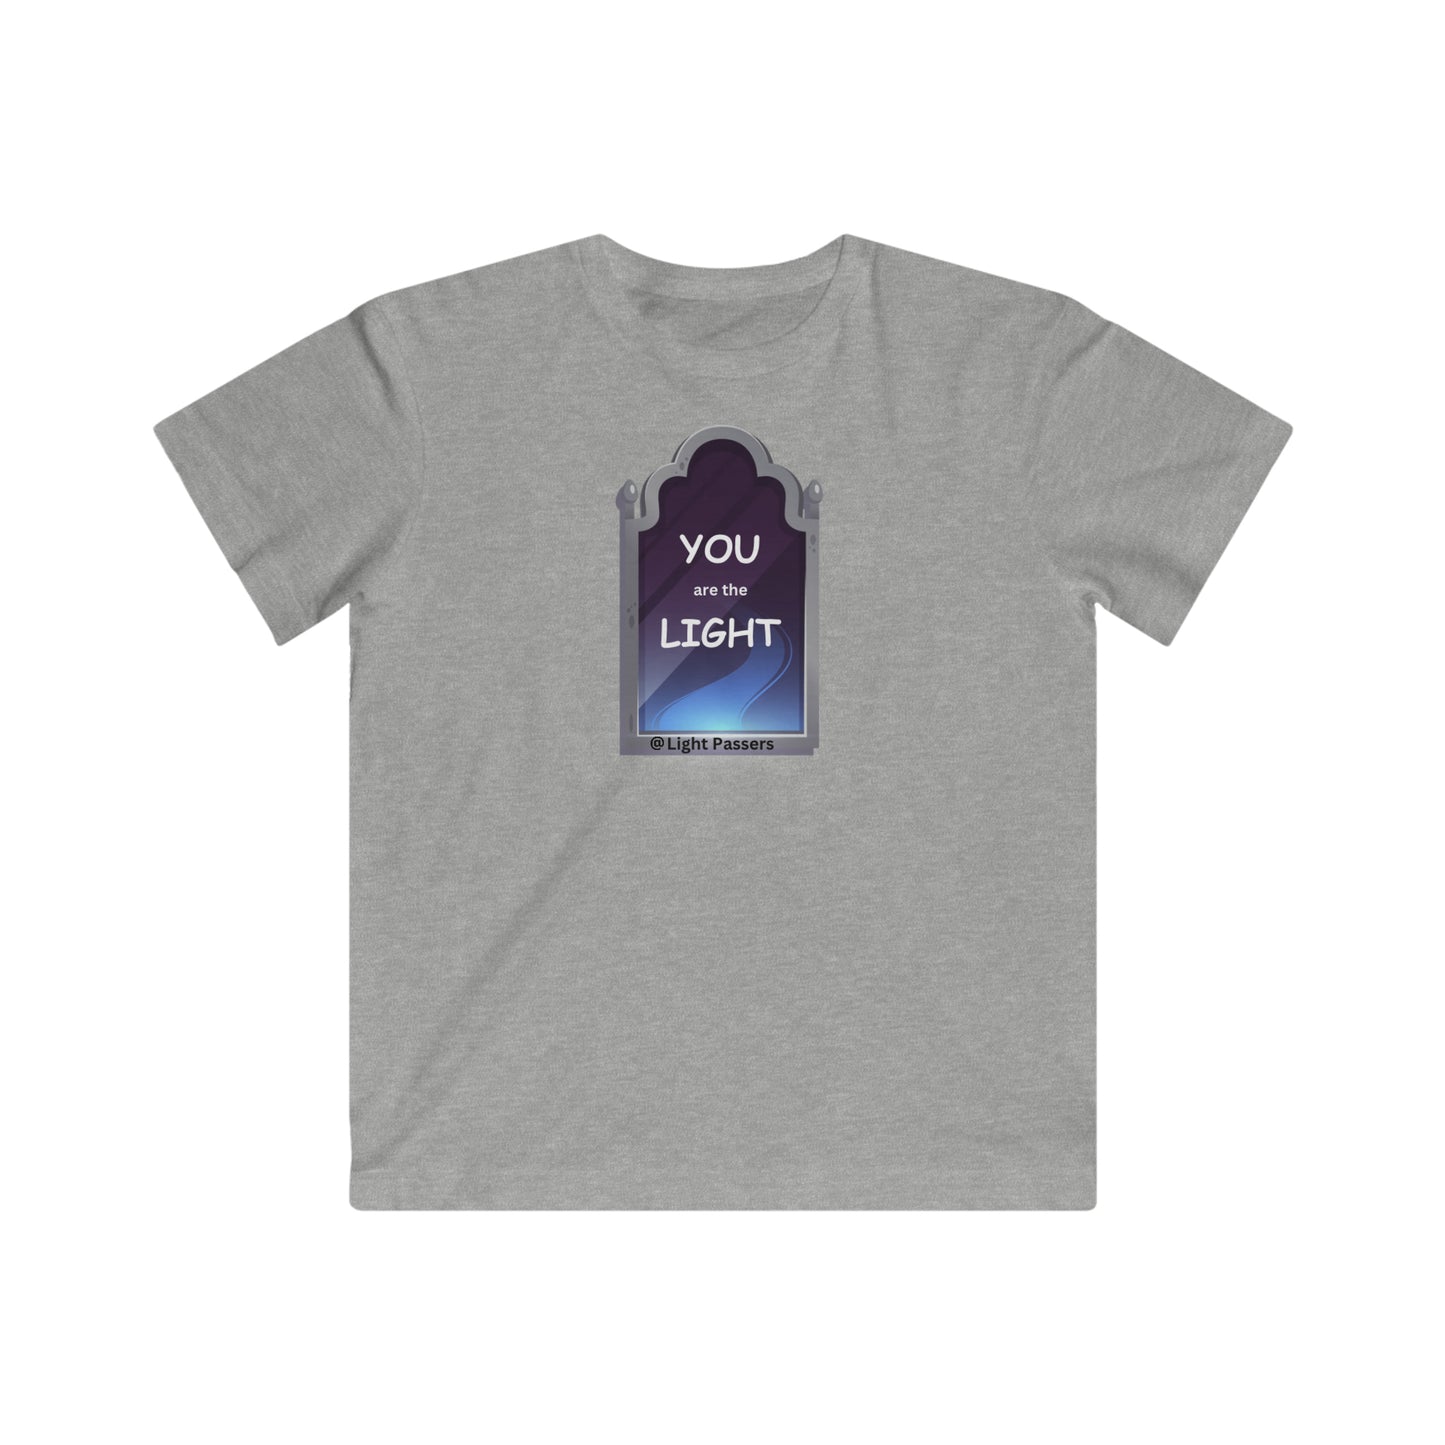 Light Passers Marketplace Loving "You are the Light" Youth Fine Jersey Tee Simple messages, Mental Health